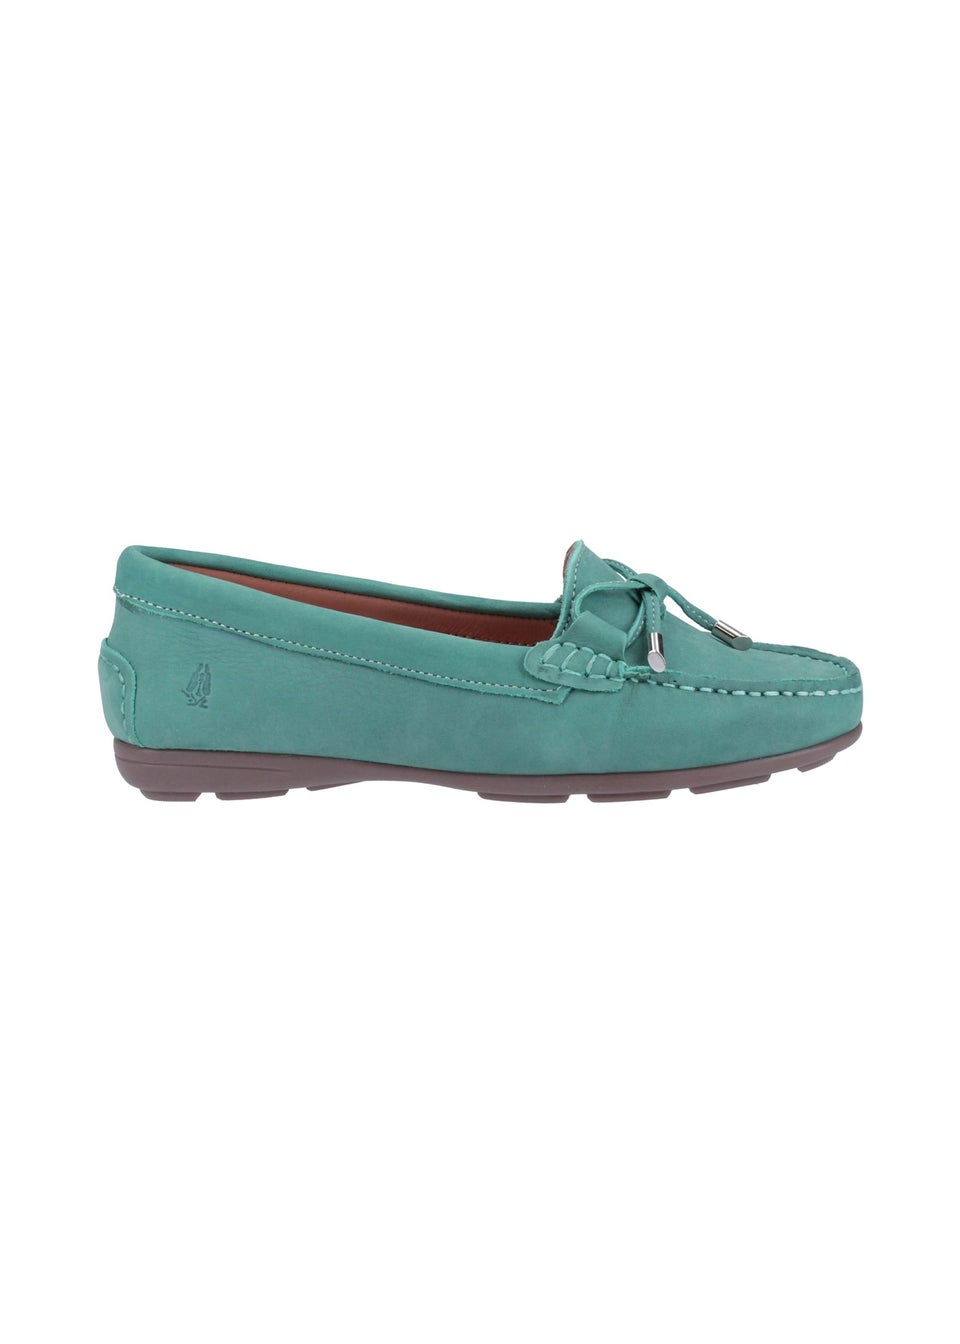 Hush Puppies Blue Maggie Toggle Shoe